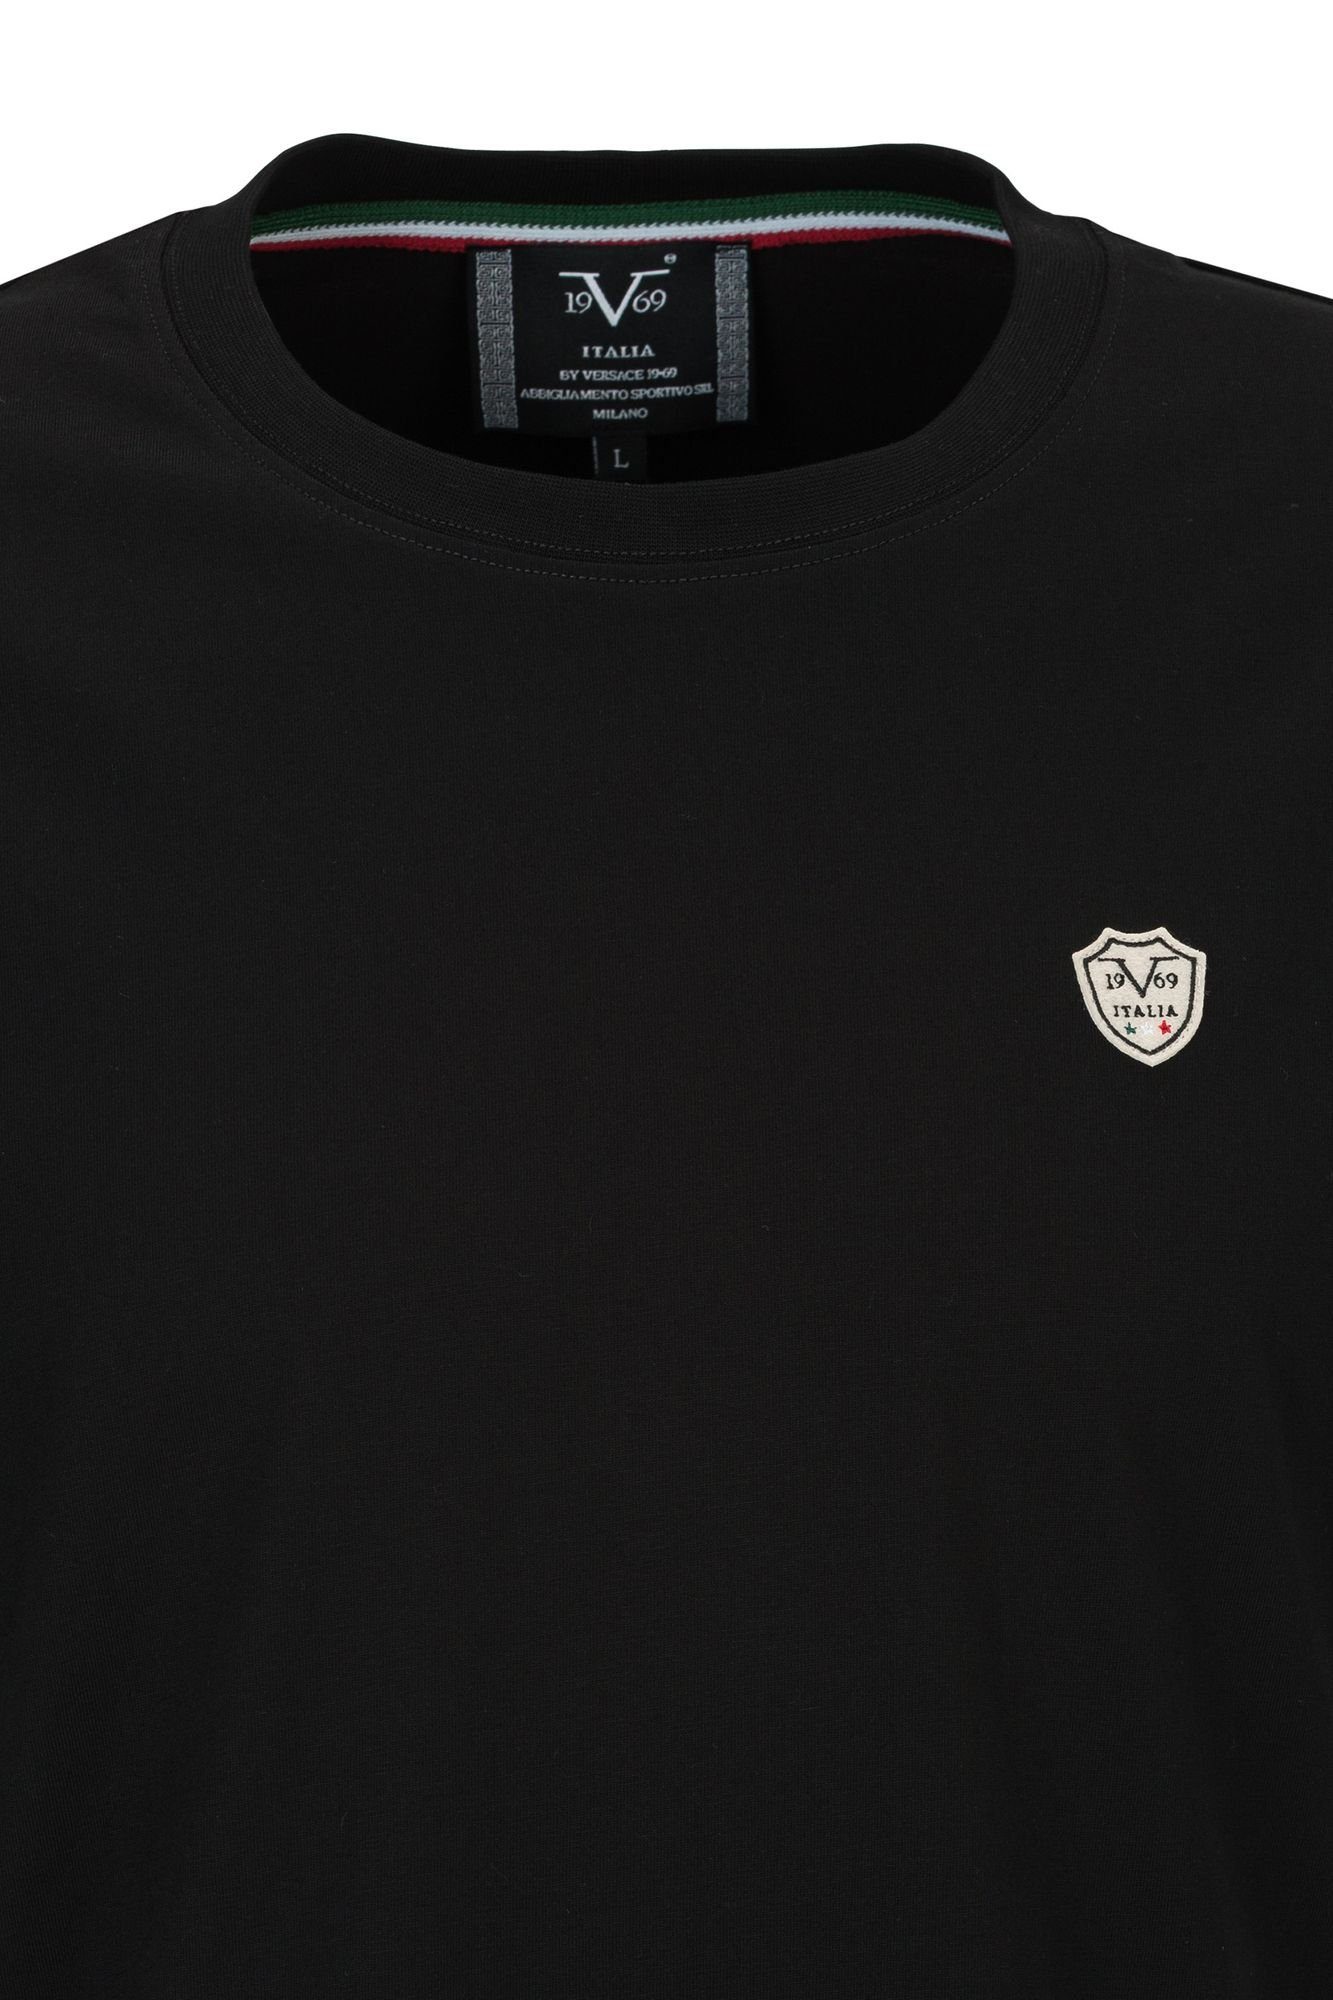 19V69 Injection Versace T-Shirt by BLACK Italia